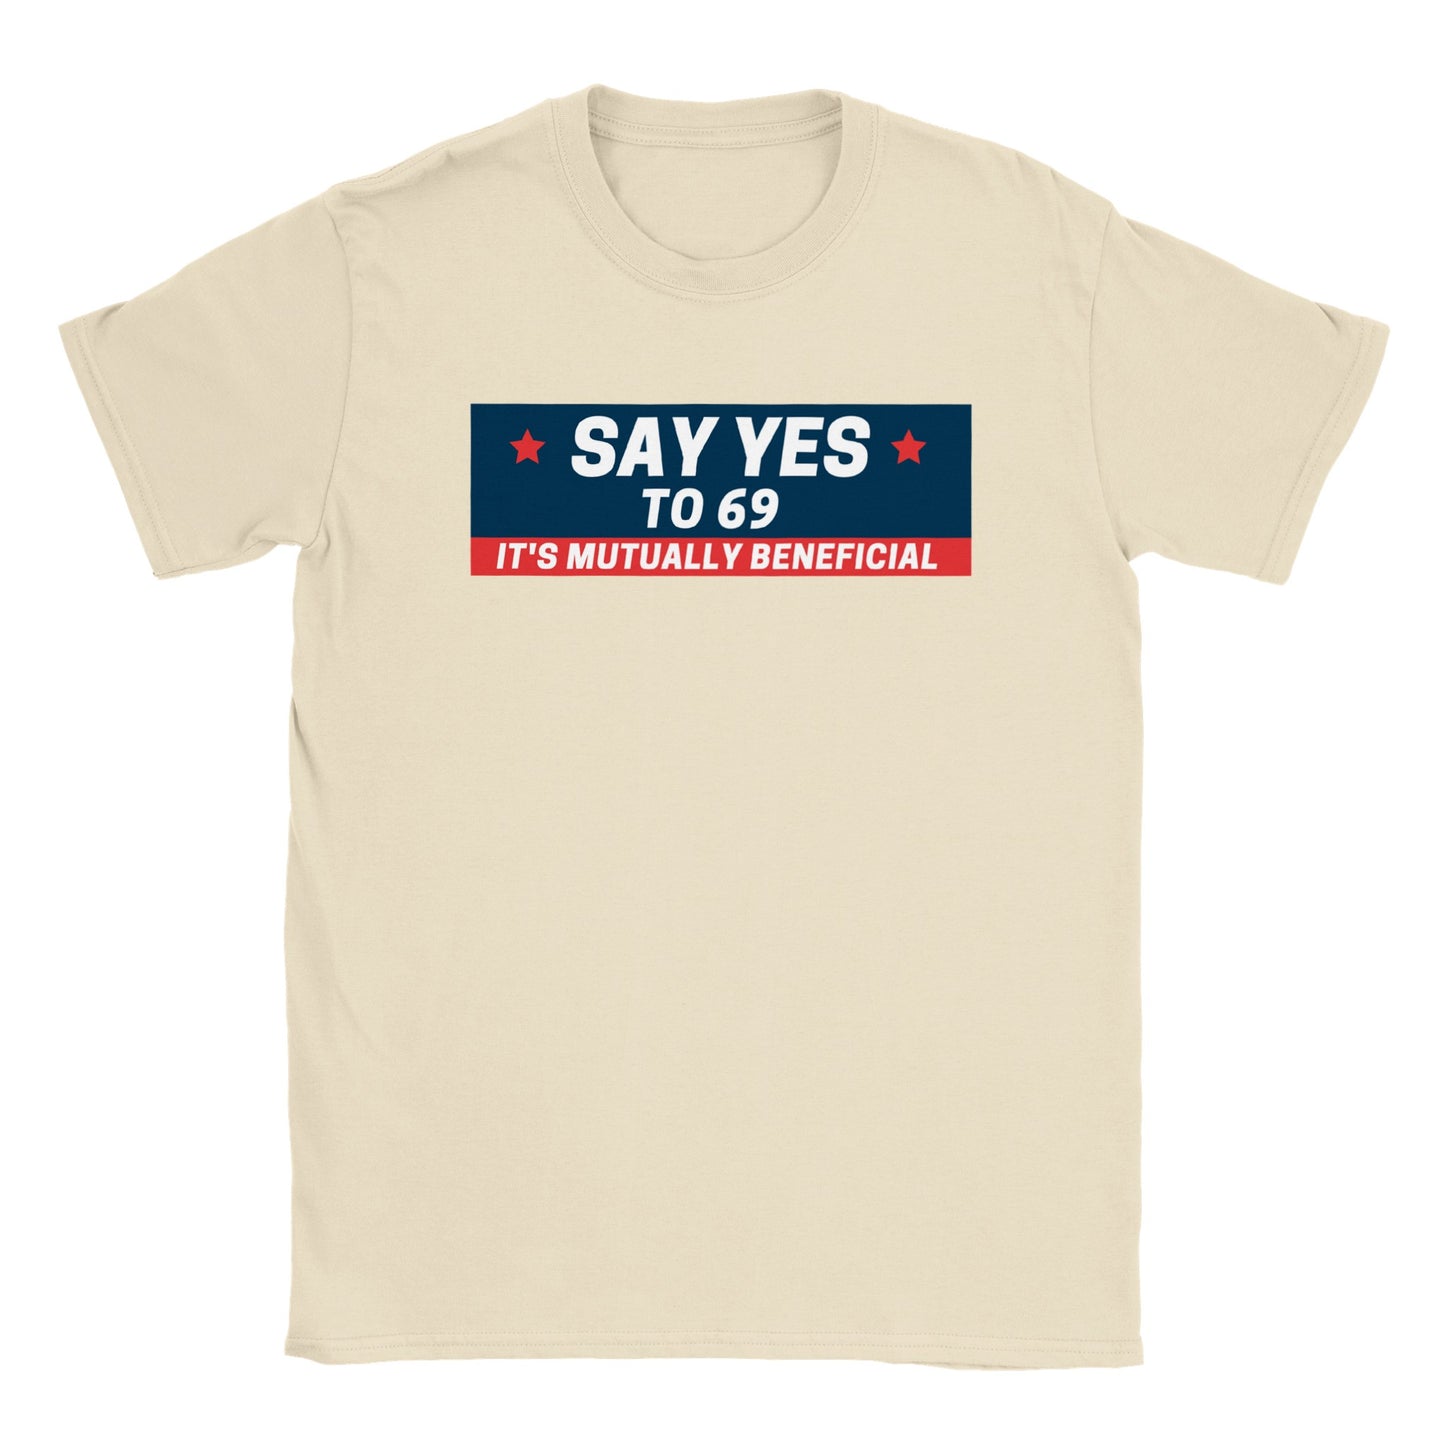 TM* Say Yes To 69 Shirt